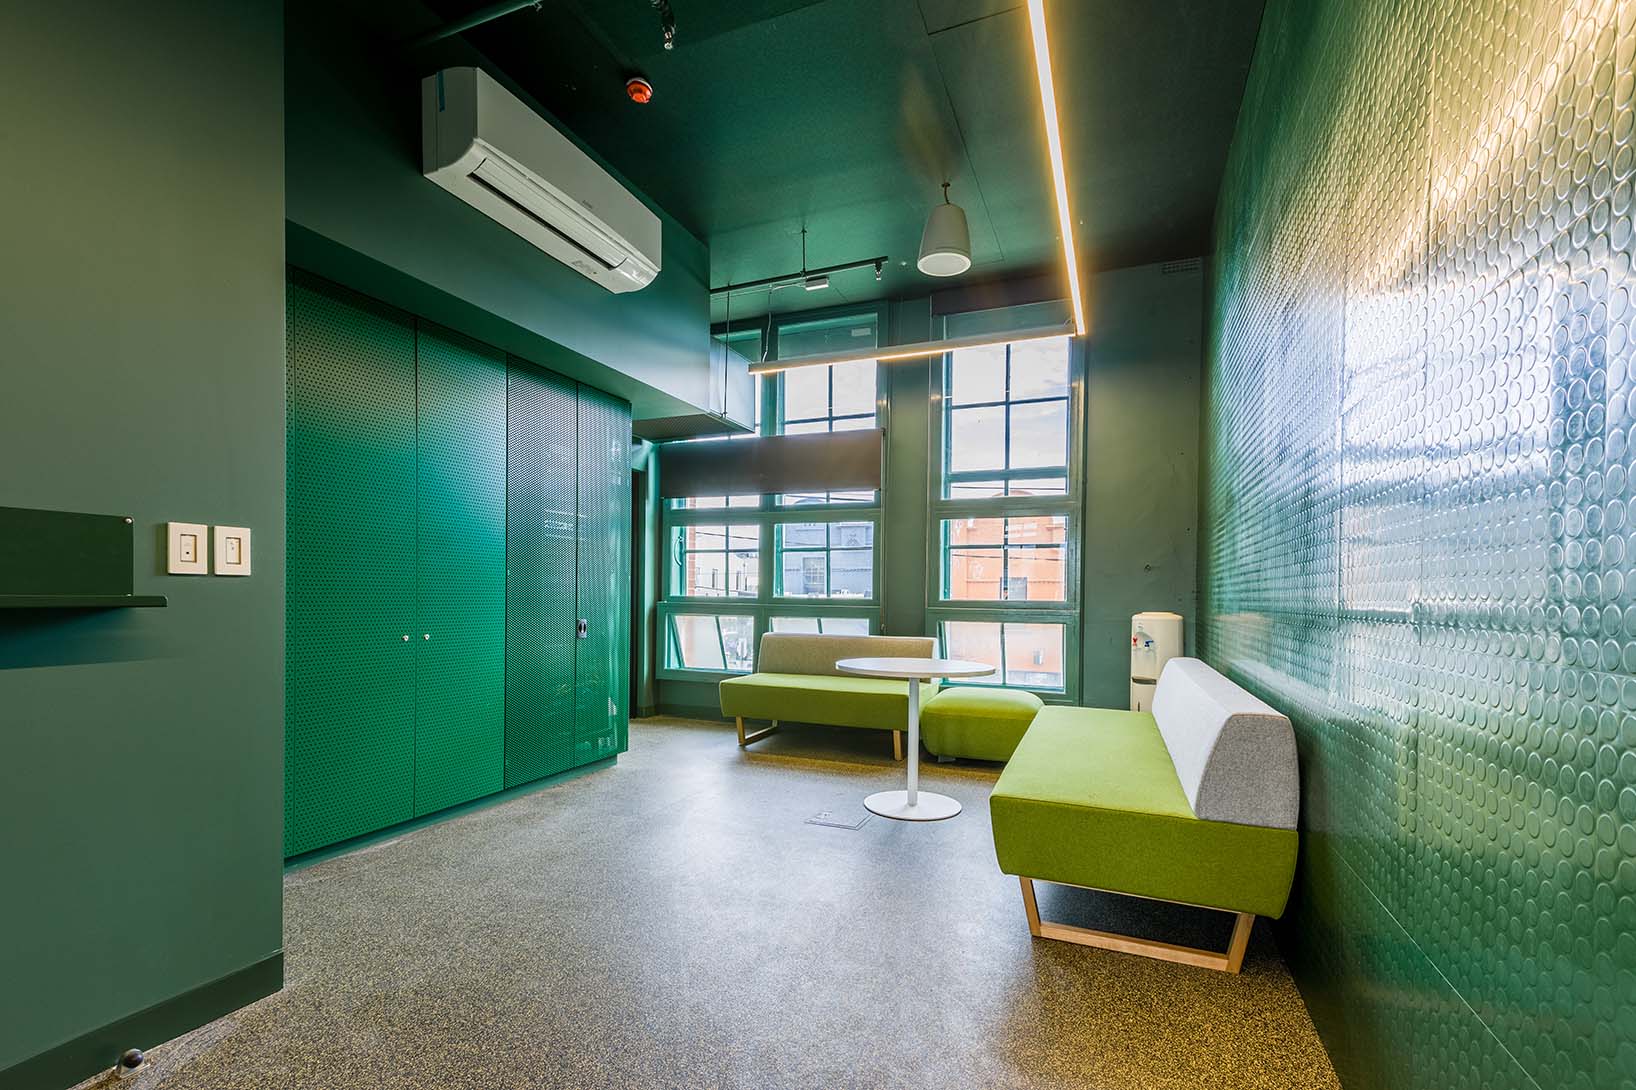 Meeting room with dark green walls, windows and light green and grey couches in the corner.